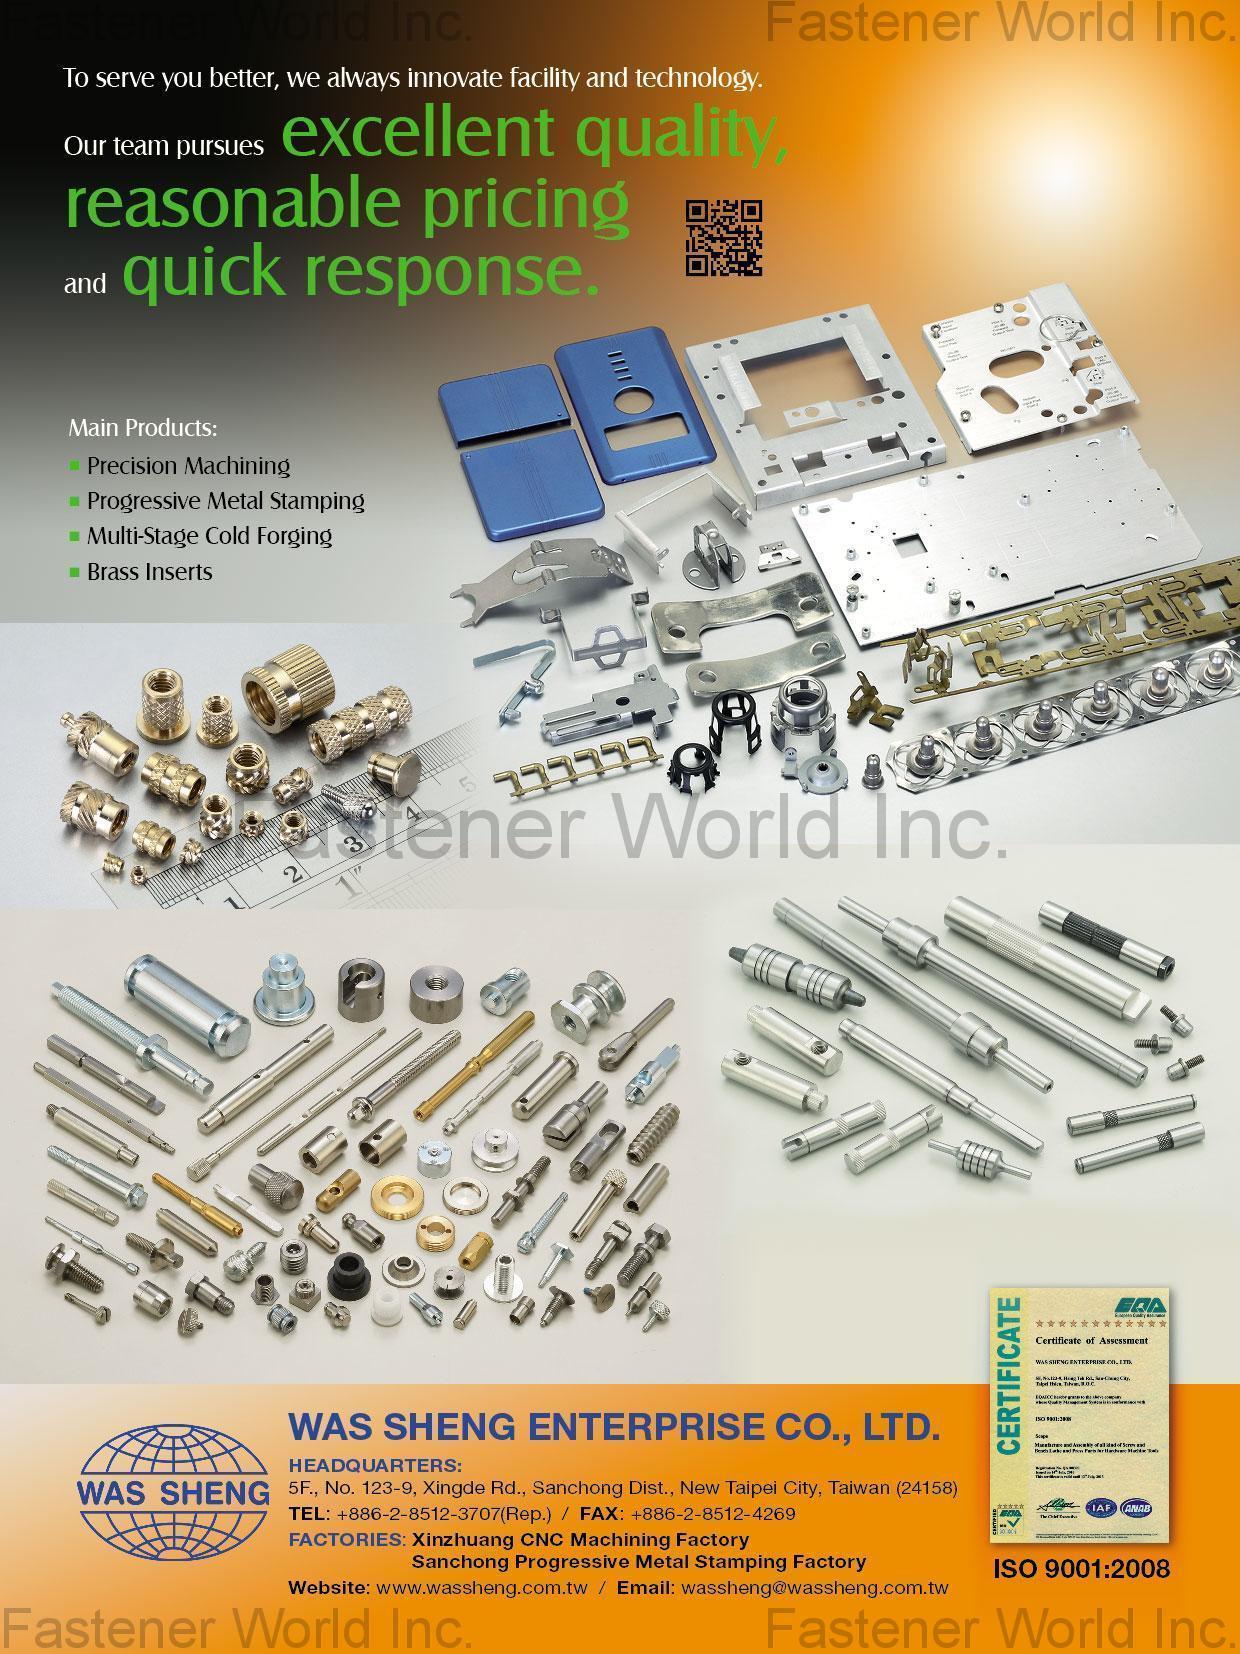 Cnc Machining Parts Precision Machining, Progressive Metal Stamping, Multi-Stage Cold Forging, Brass Inserts